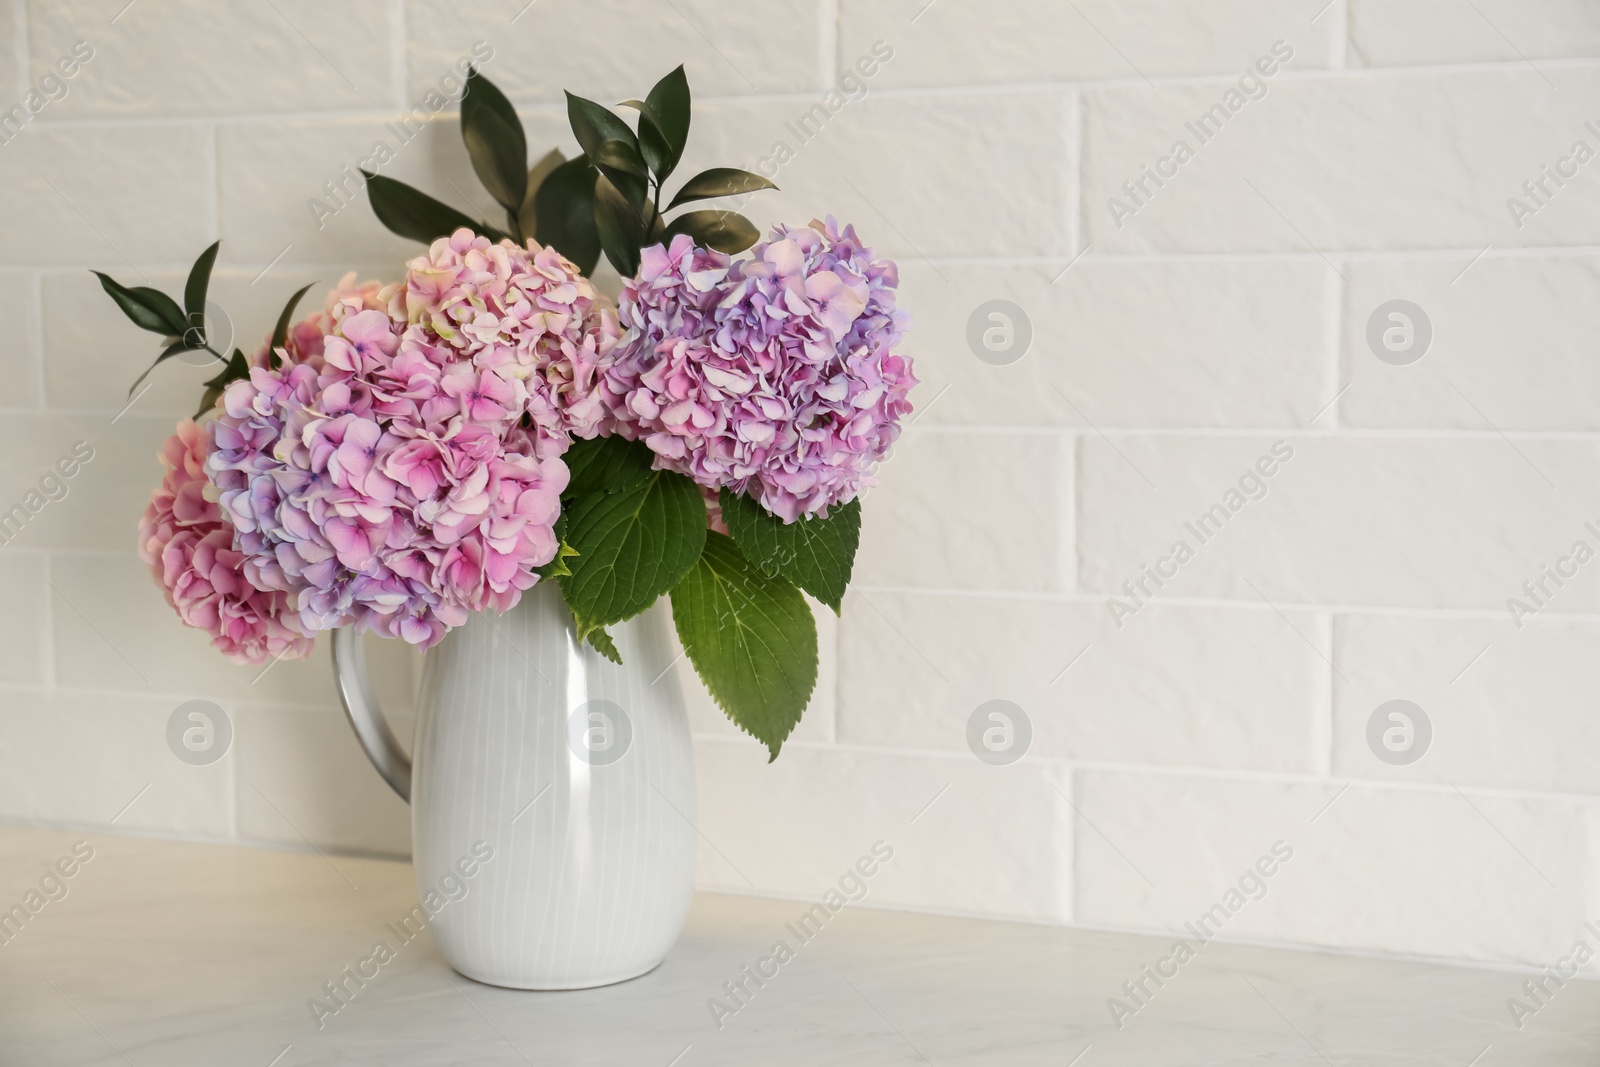 Photo of Bouquet with beautiful purple hydrangea flowers on light countertop. Space for text